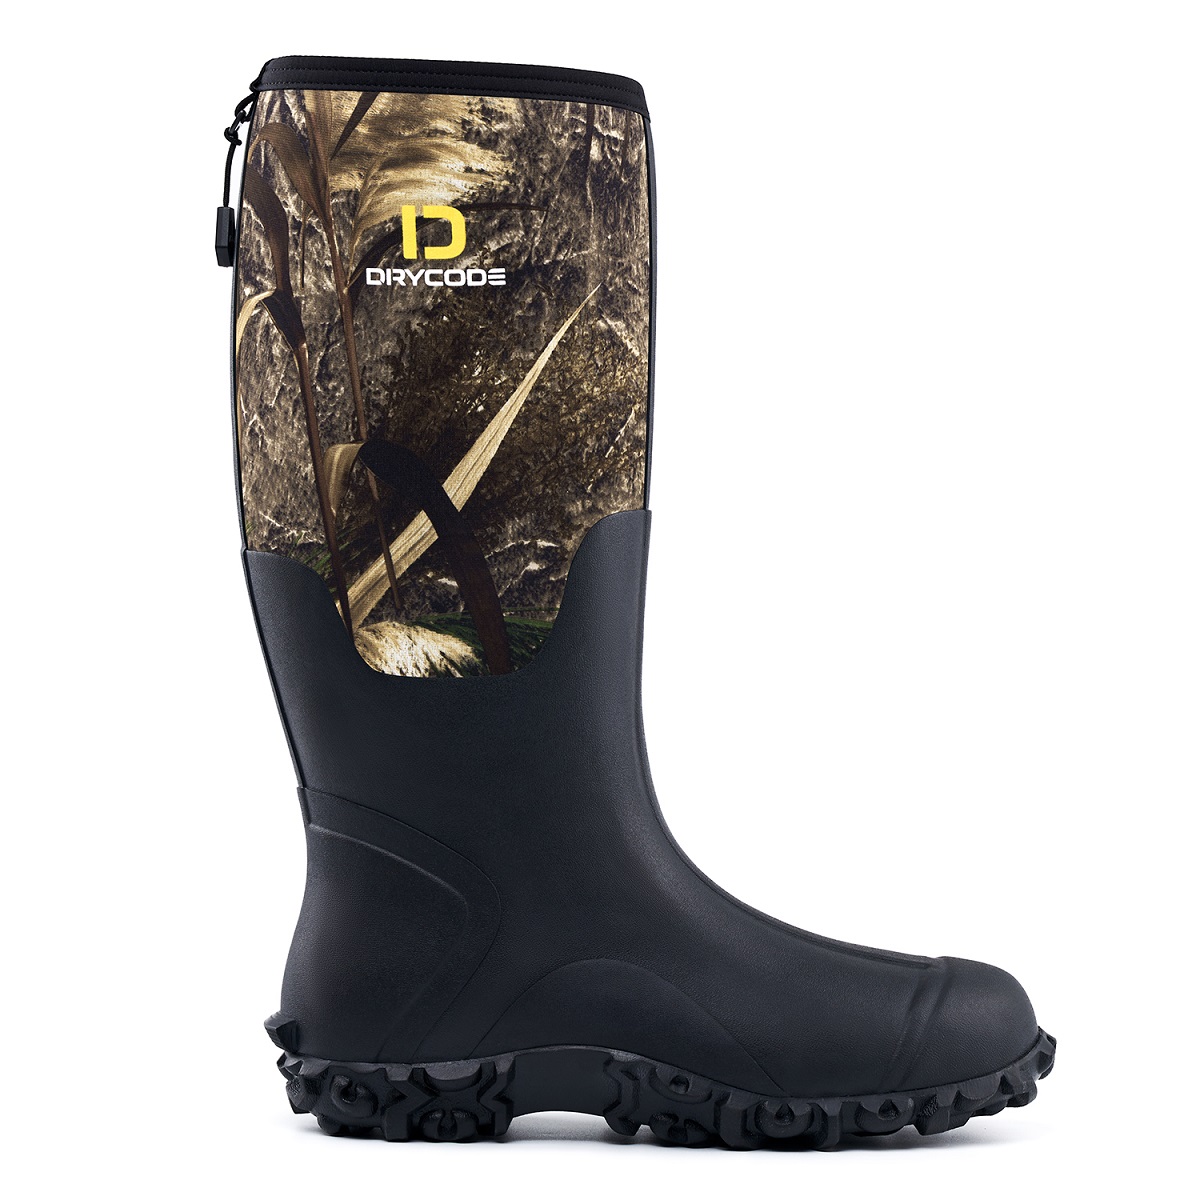 DRYCODE Rubber Hunting Boots for Men, 5mm Neoprene Waterproof Boots